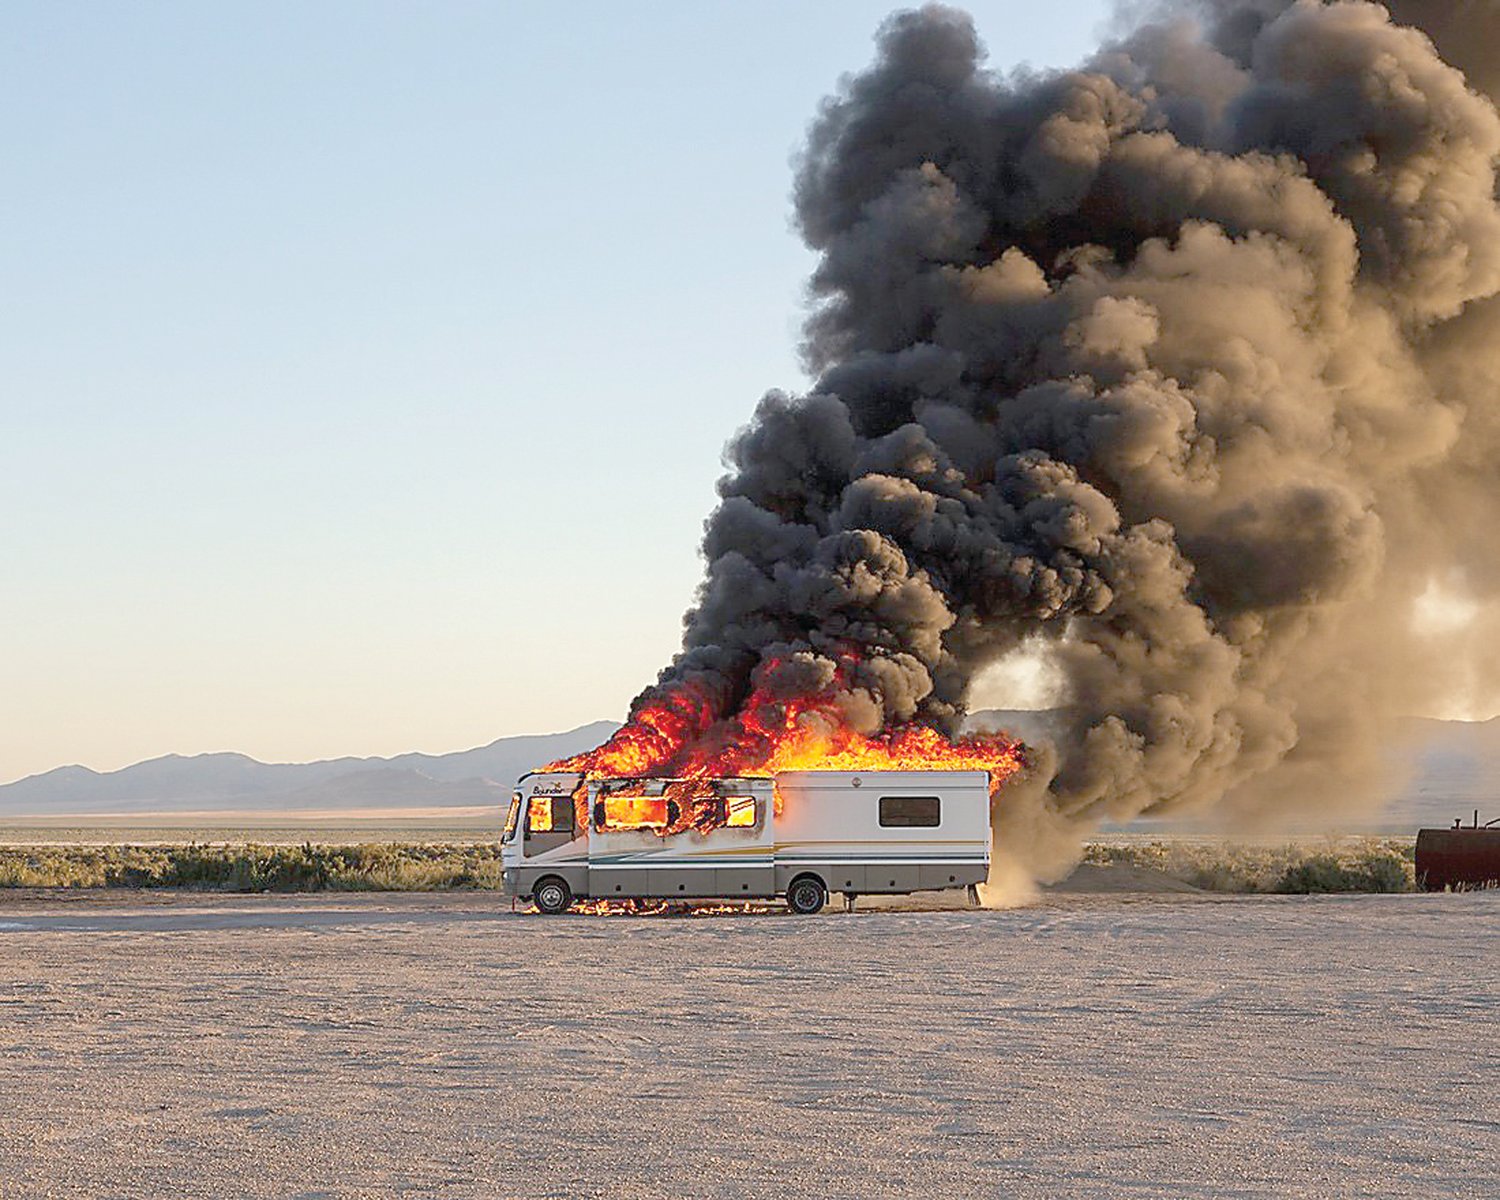 “RV Fire, Nevada 2019” by Lindsay Godin is one of the pieces in “The Road” photography exhibit at the MCCC James Kerney Campus Gallery in Trenton.